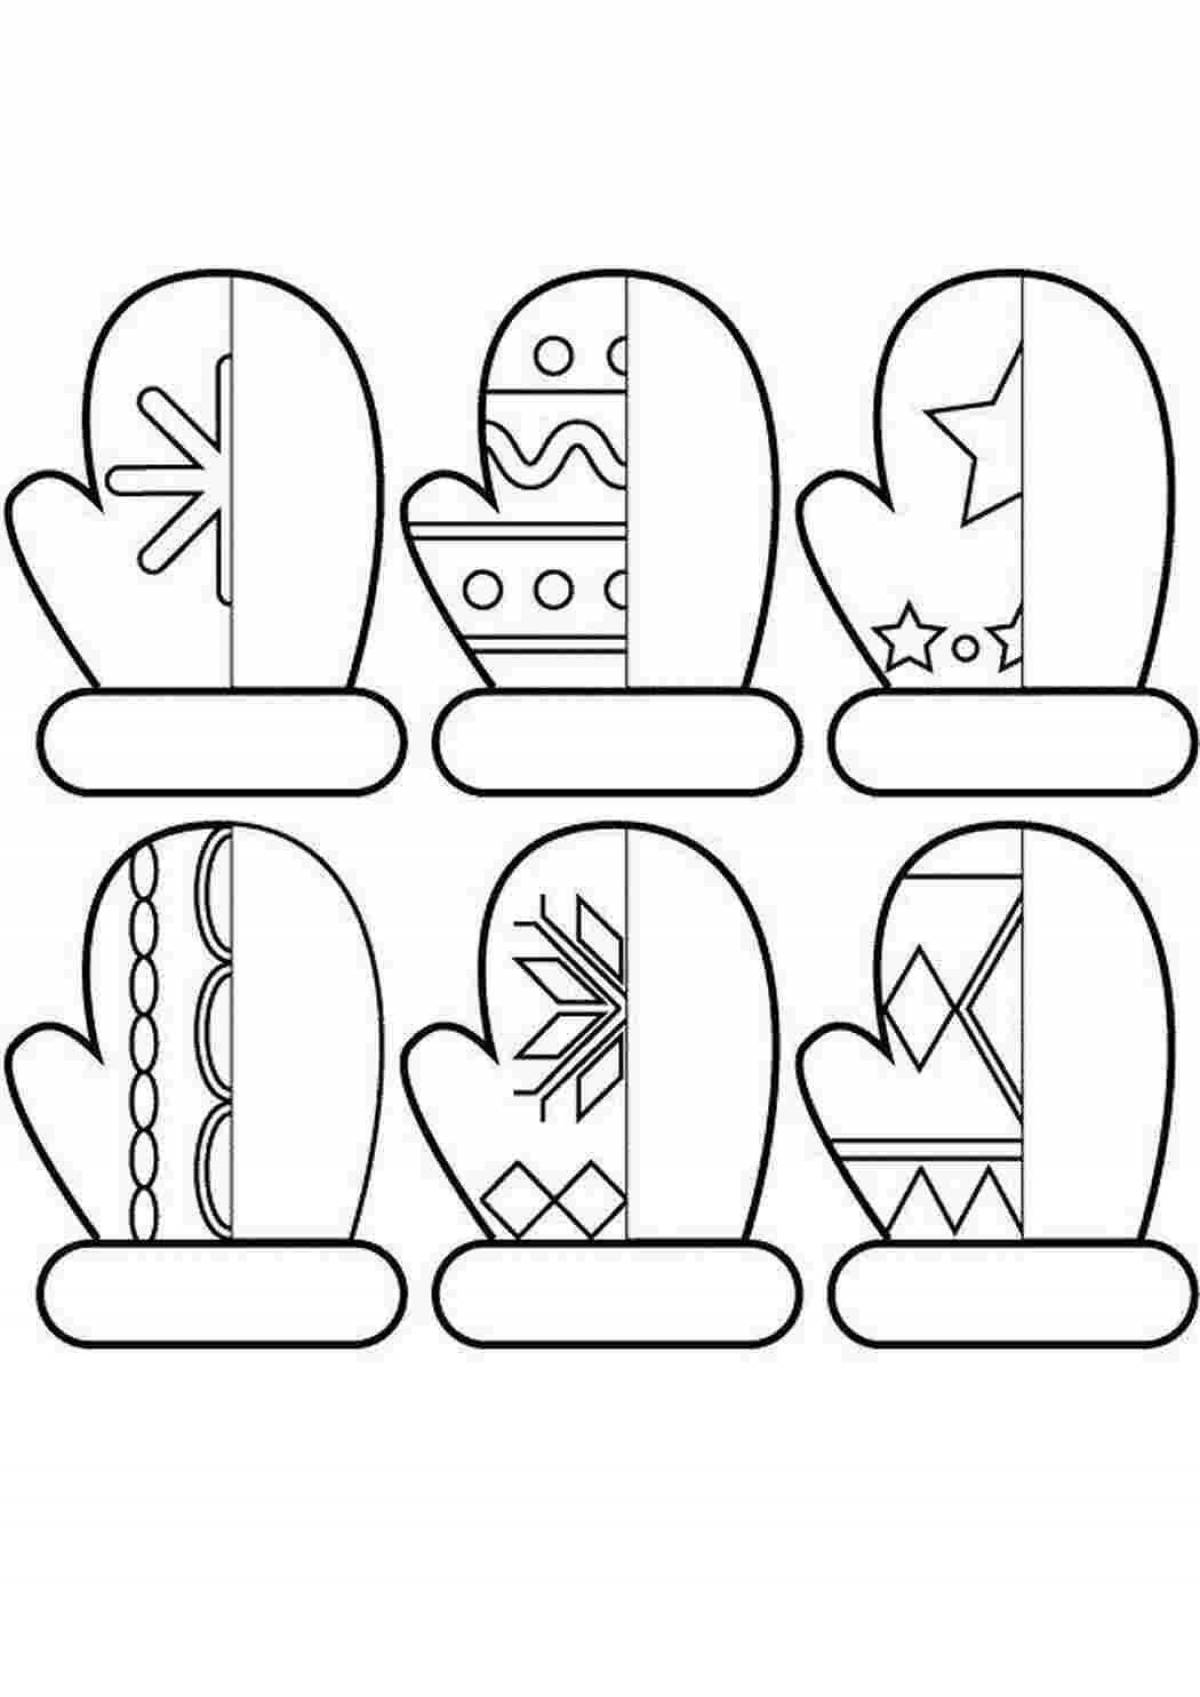 Coloring book funny mittens for kindergarten